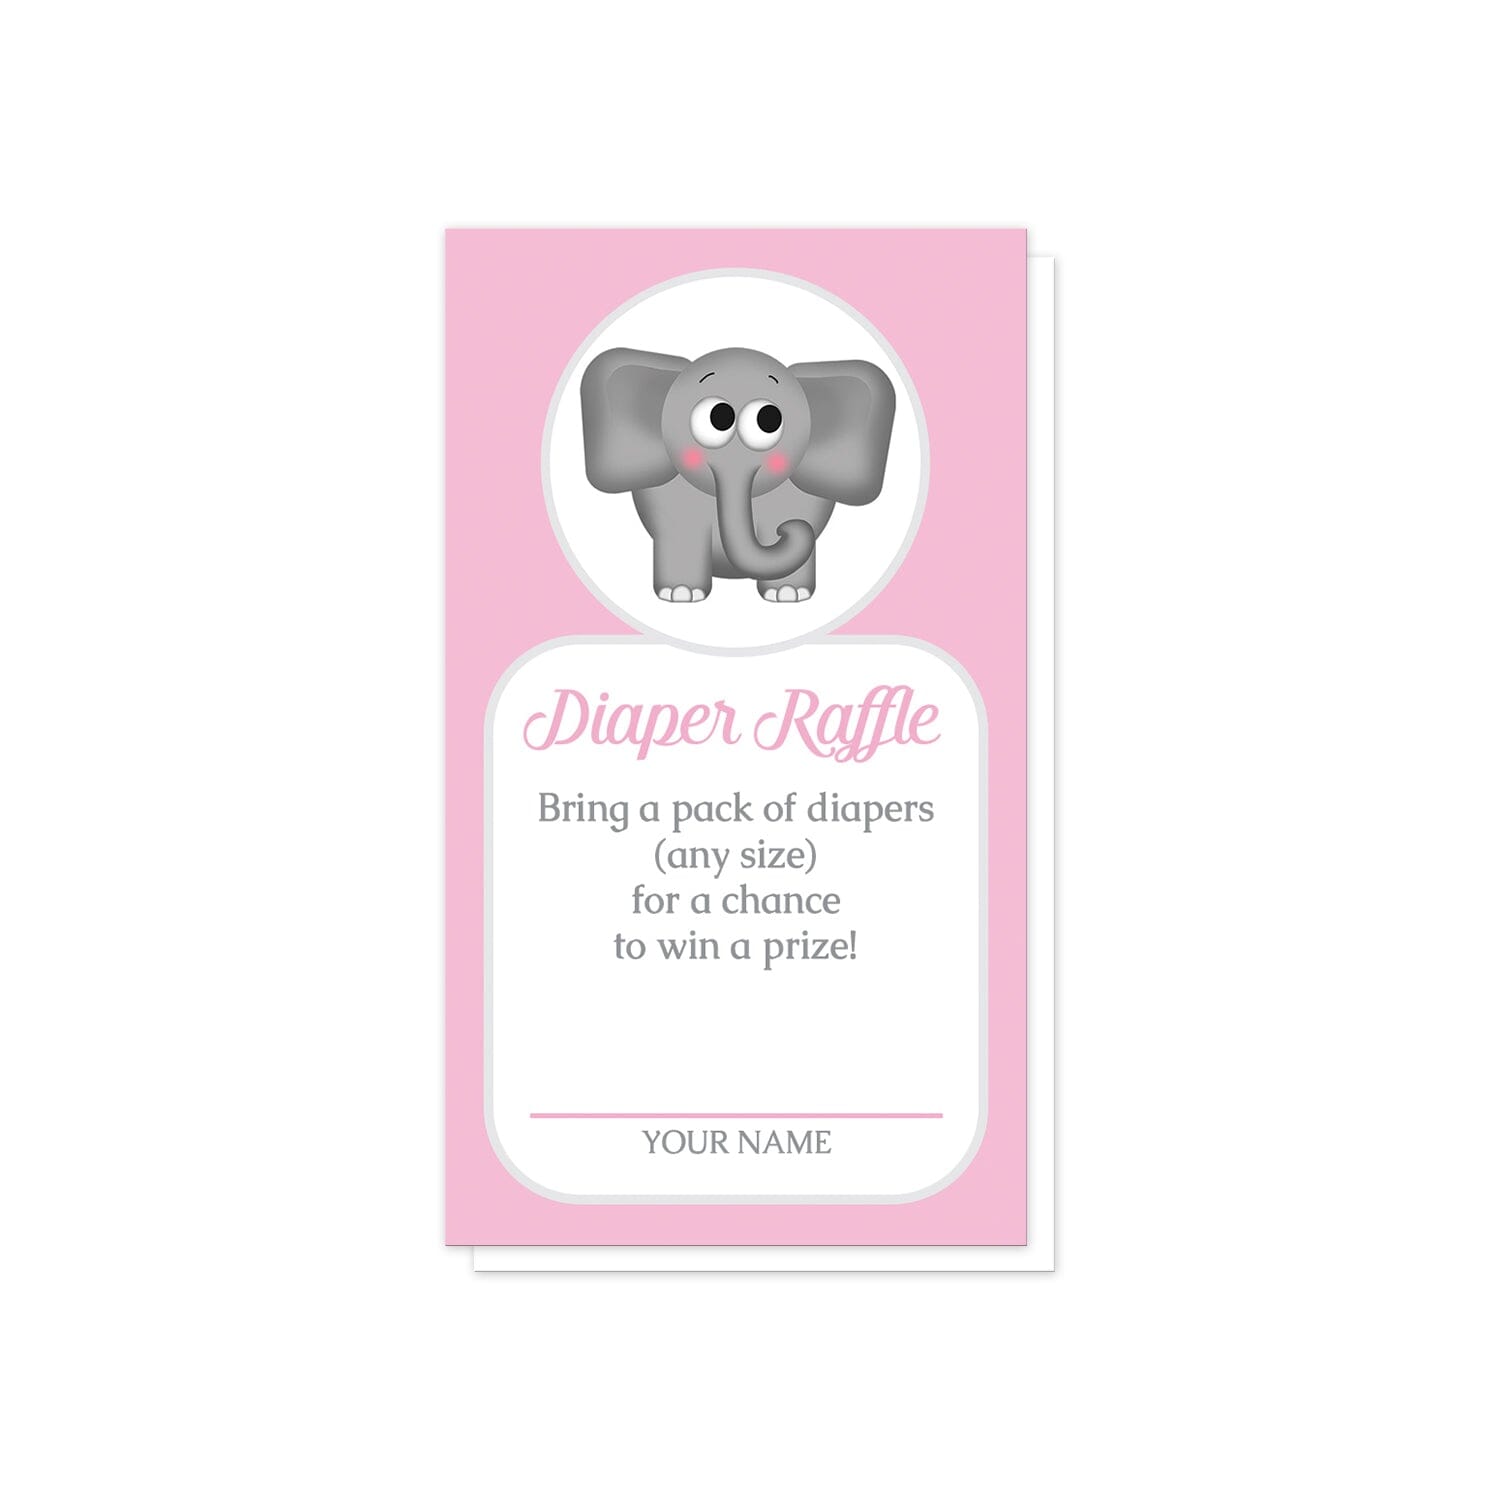 Cute Elephant Pink Diaper Raffle Cards at Artistically Invited. Cute elephant pink diaper raffle cards illustrated with an affectionate and adorable gray elephant in a white circle over a pink background color. Your diaper raffle details are printed in pink and gray in a white rectangular area below the cute little elephant.